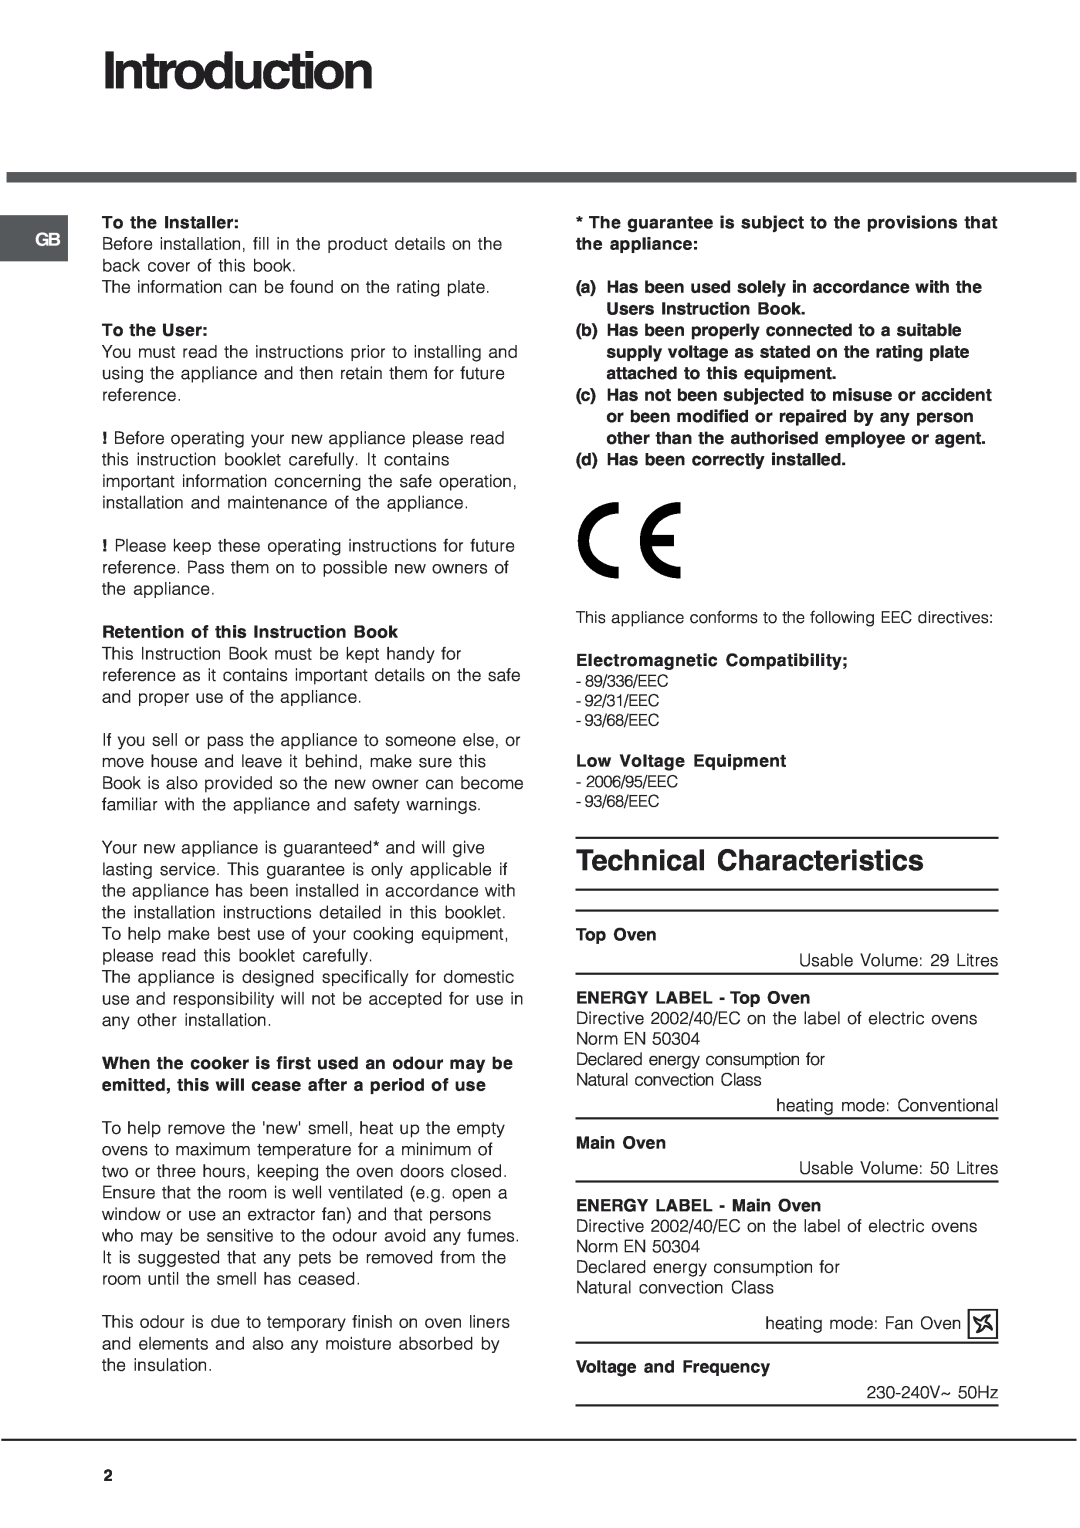 Hotpoint UQ89I Introduction, Technical Characteristics, To the Installer, To the User, Retention of this Instruction Book 